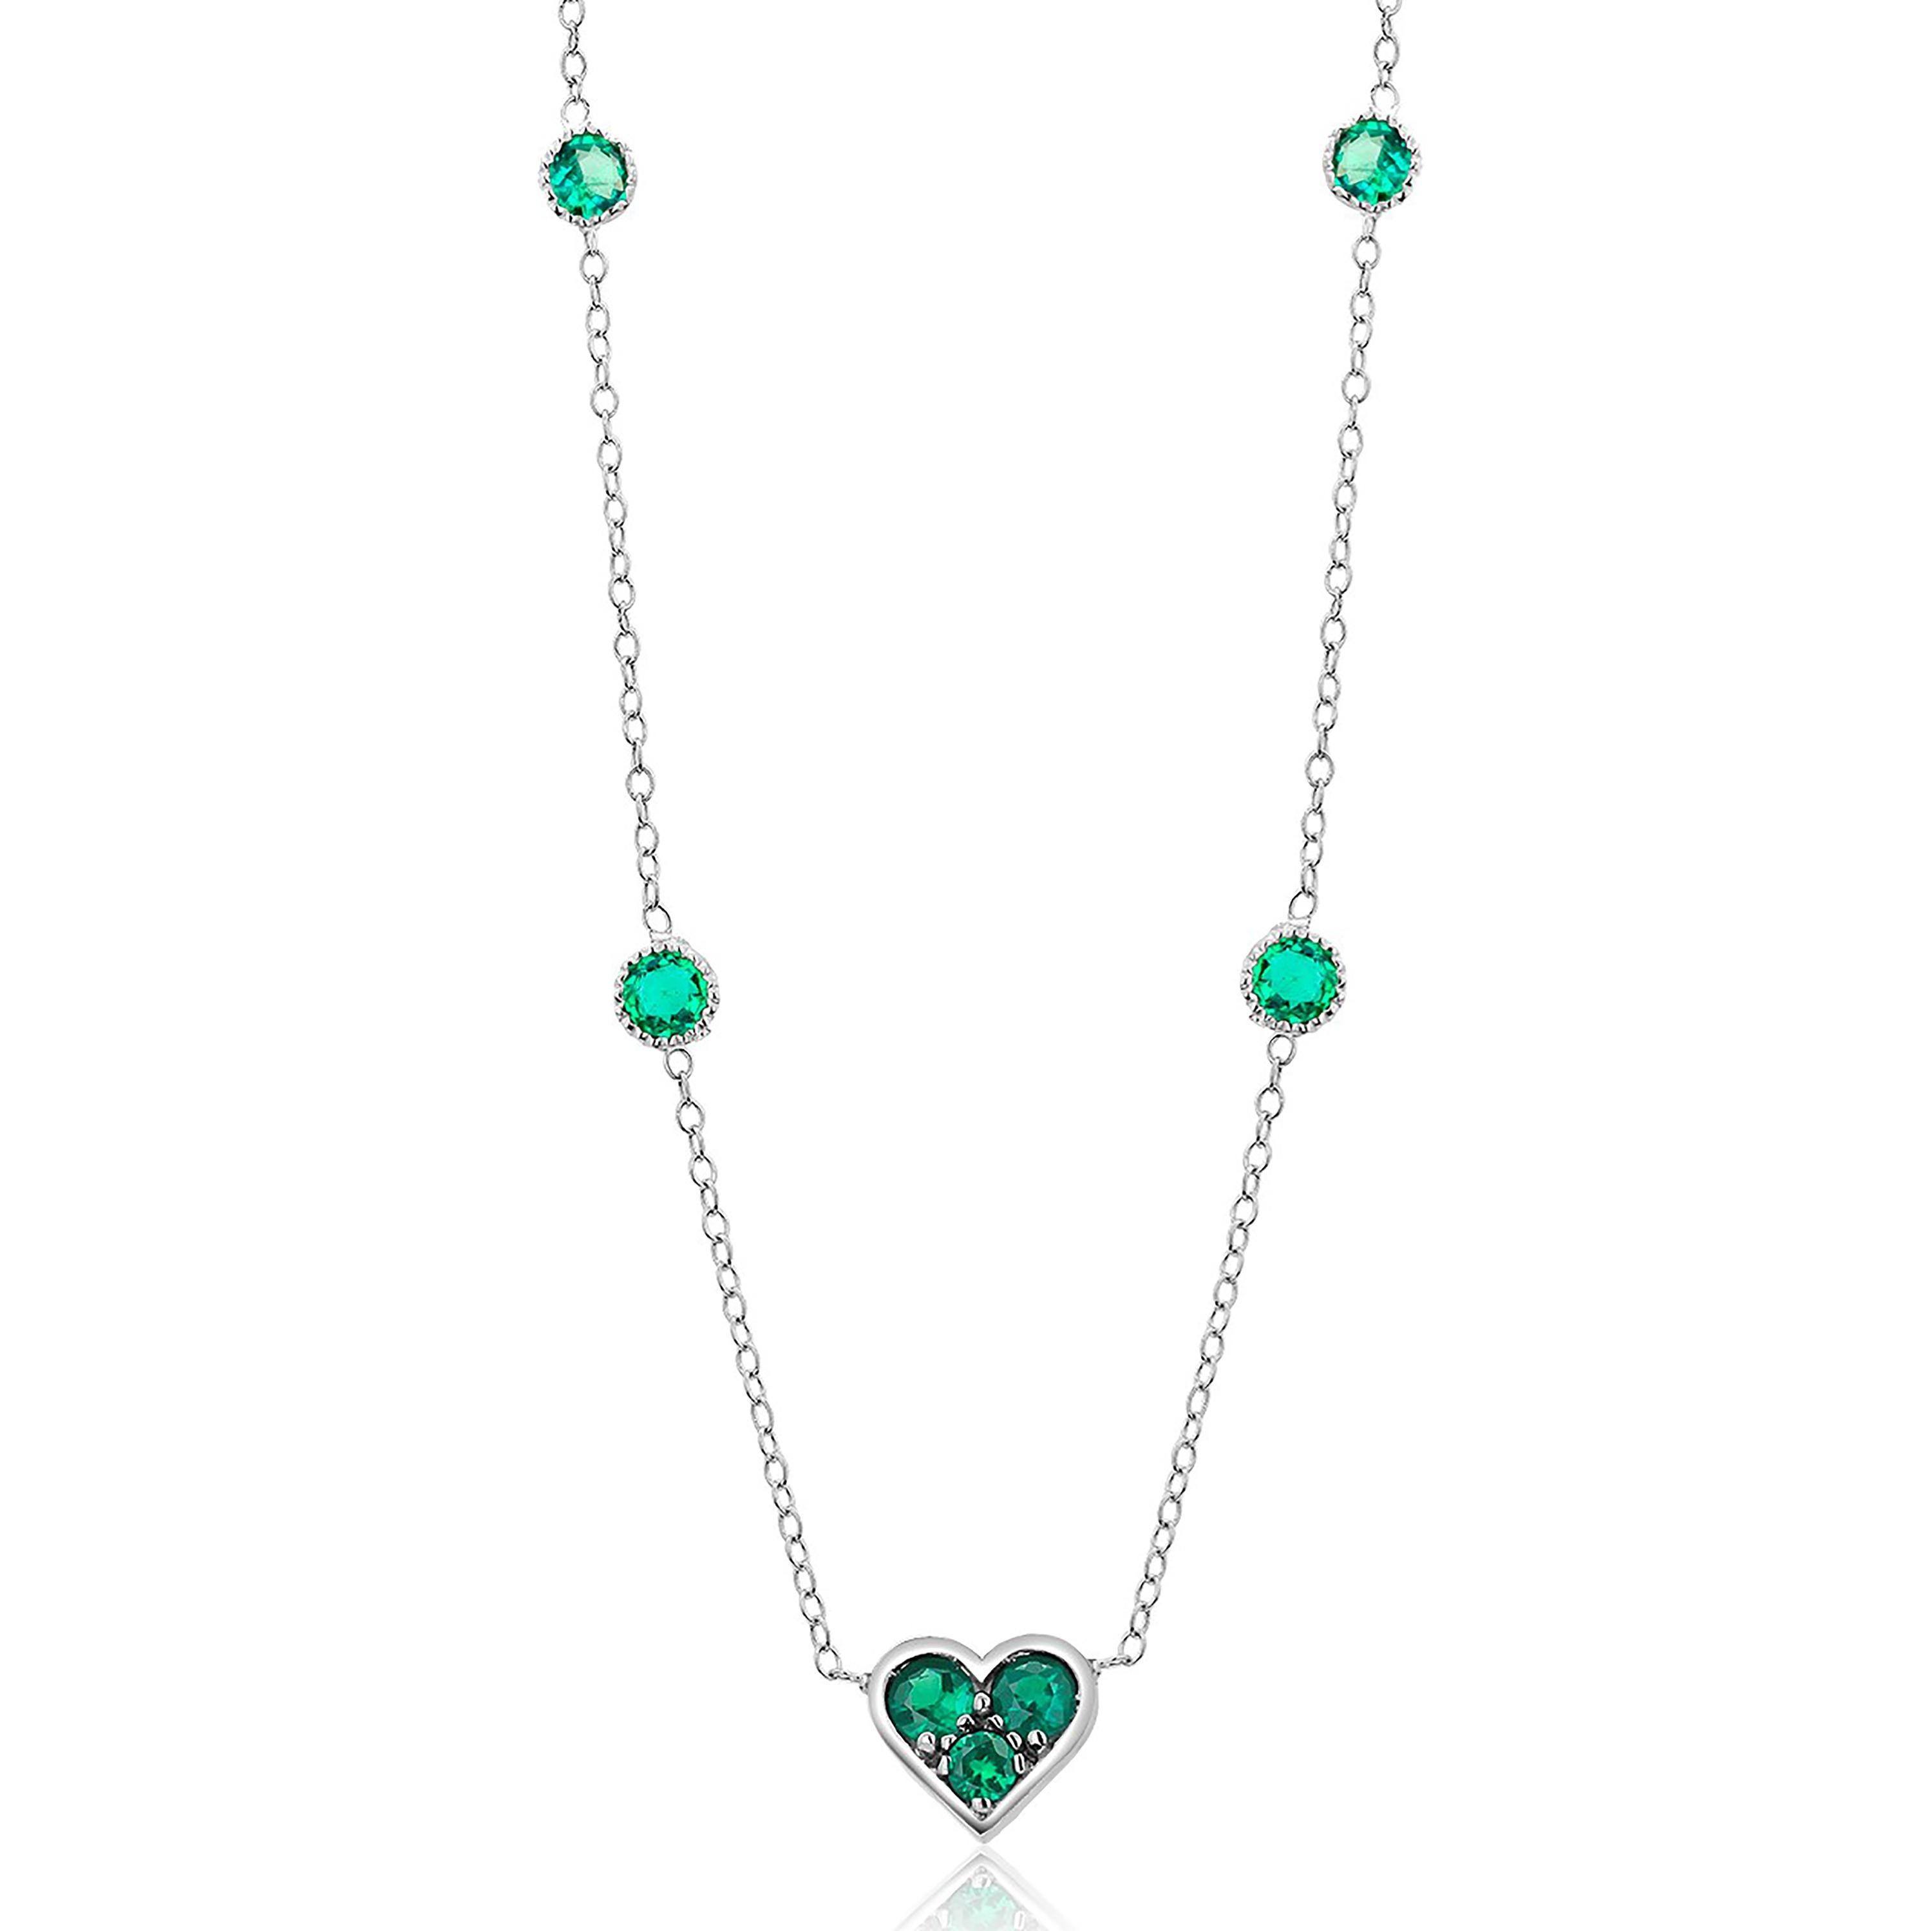 Women's or Men's Heart Shaped Emerald Charm Four Bezel Emerald Stations Gold Necklace Pendant